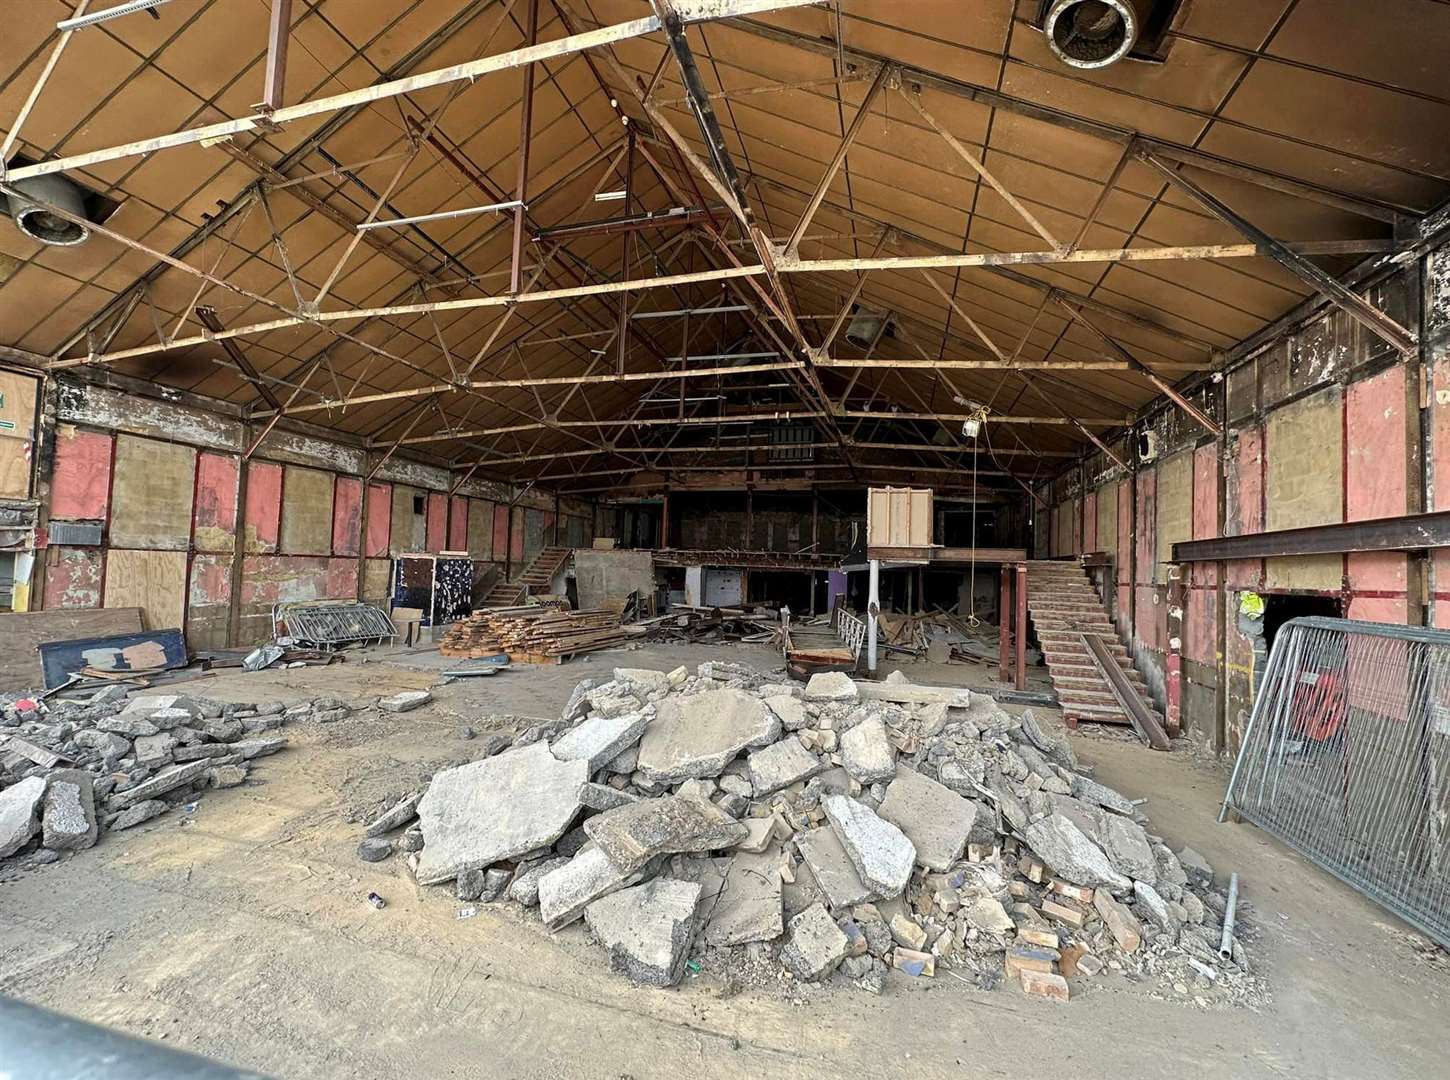 Rubble, wooden planks and debris in the stripped-out building. Picture: Glenn White